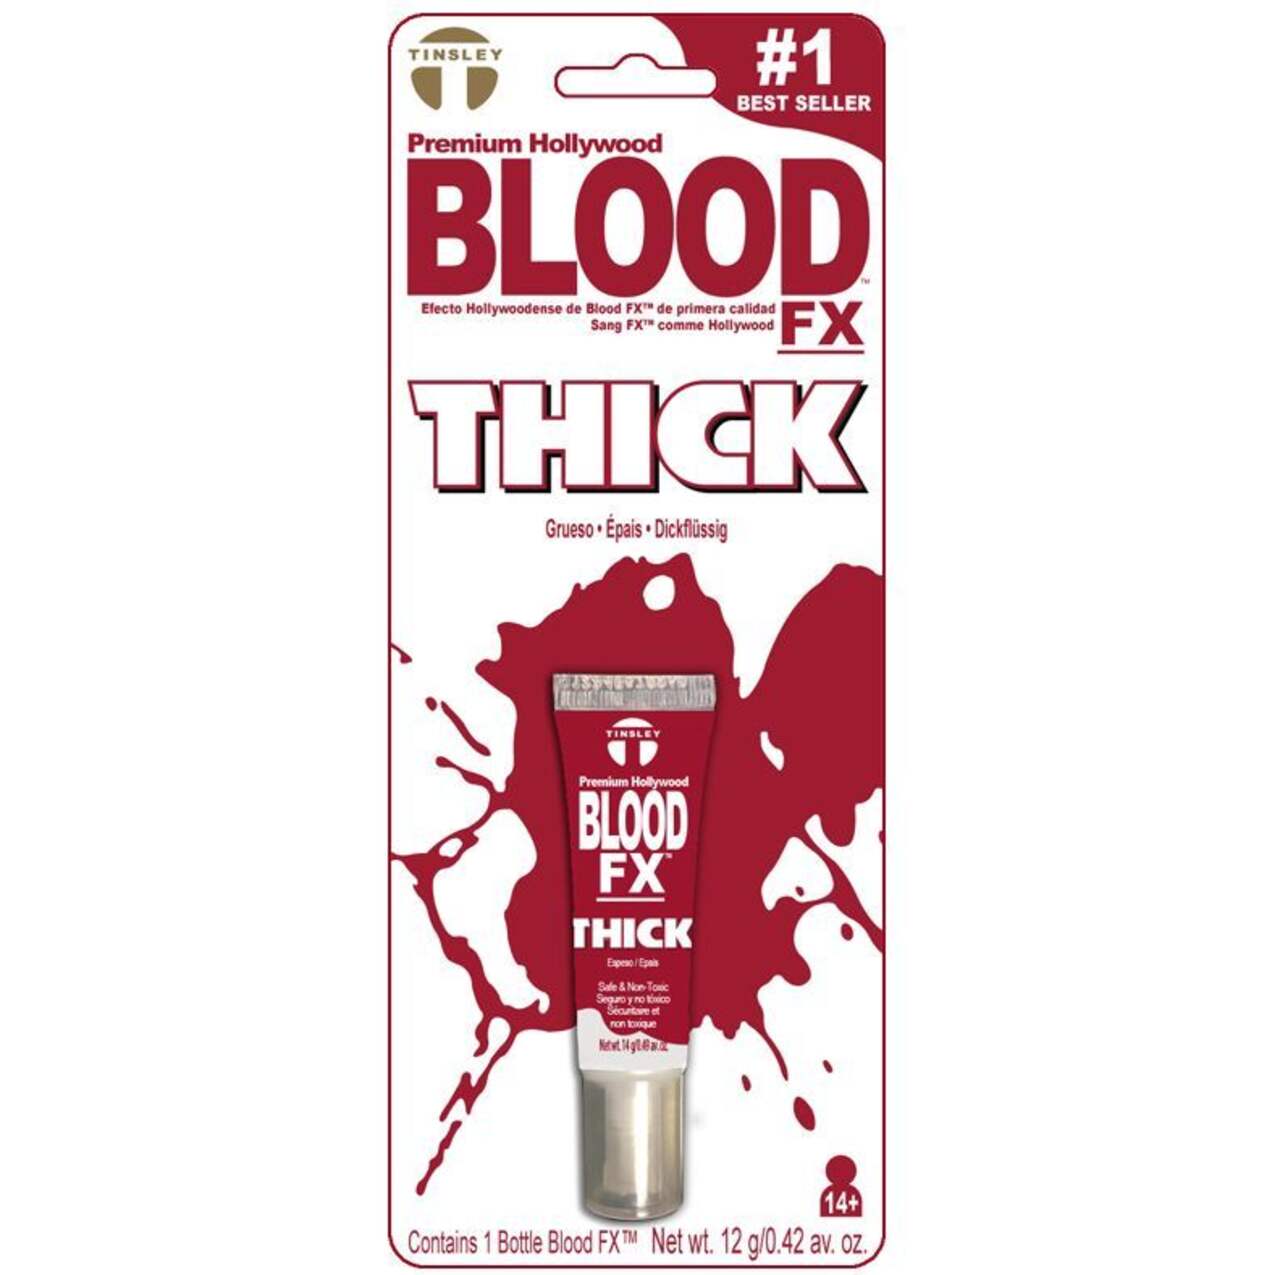 Tinsley Transfers Thick Quick-Dry Fake Blood, Red, 12-g, Wearable Costume  Accessory for Halloween